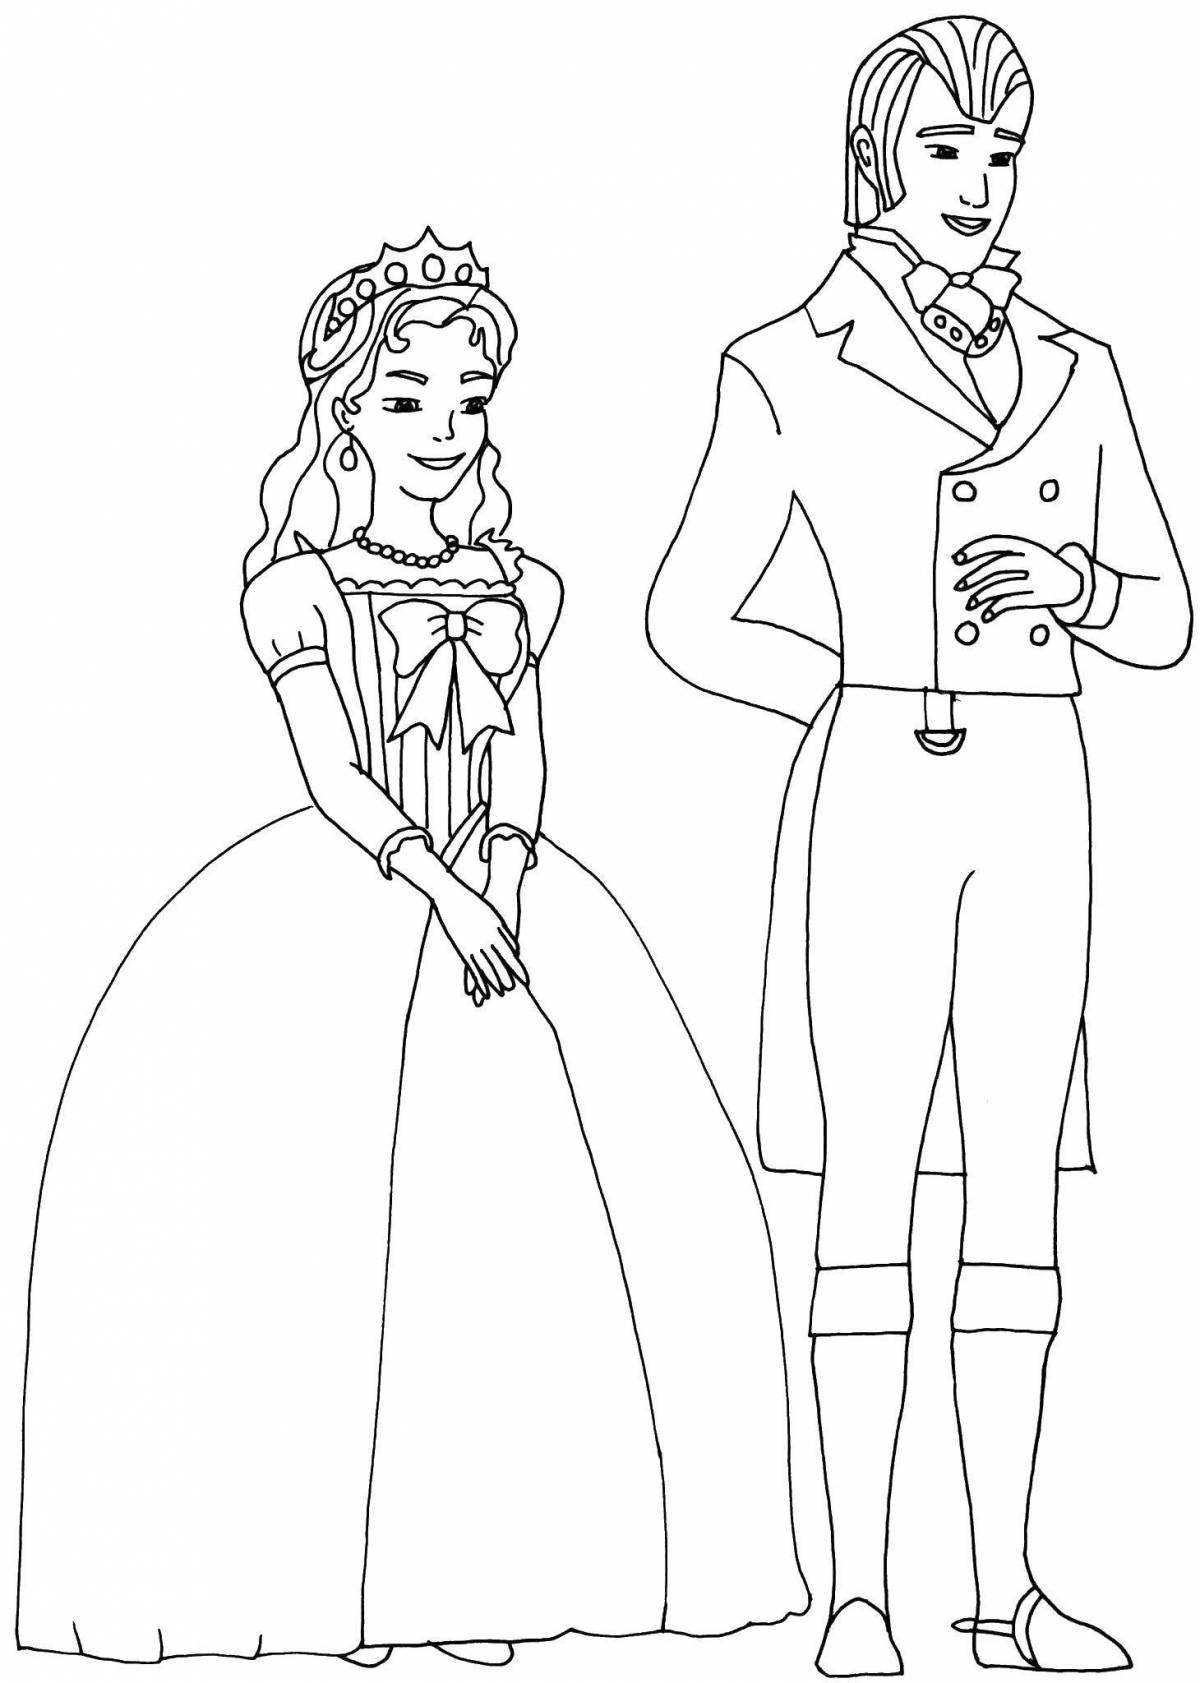 Ornate king and queen coloring book